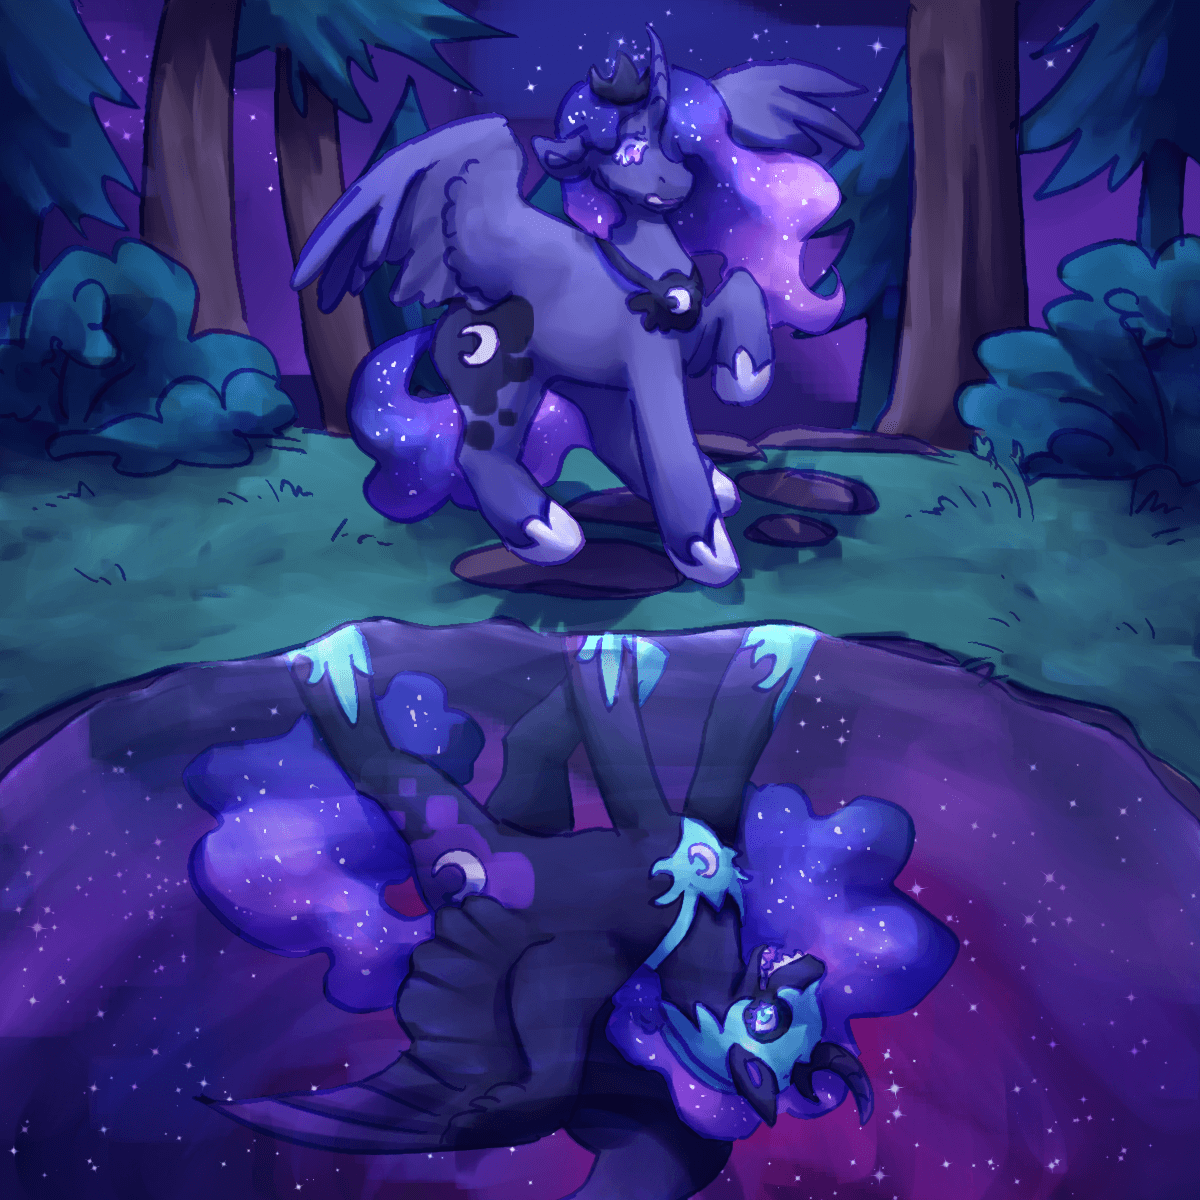 a drawing of princess luna from my little pony. she is looking into a pond at
		nighttime, but her reflection shows nightmare moon instead. with a red tint to the night sky behind her. luna looks
		shocked and upset at this.